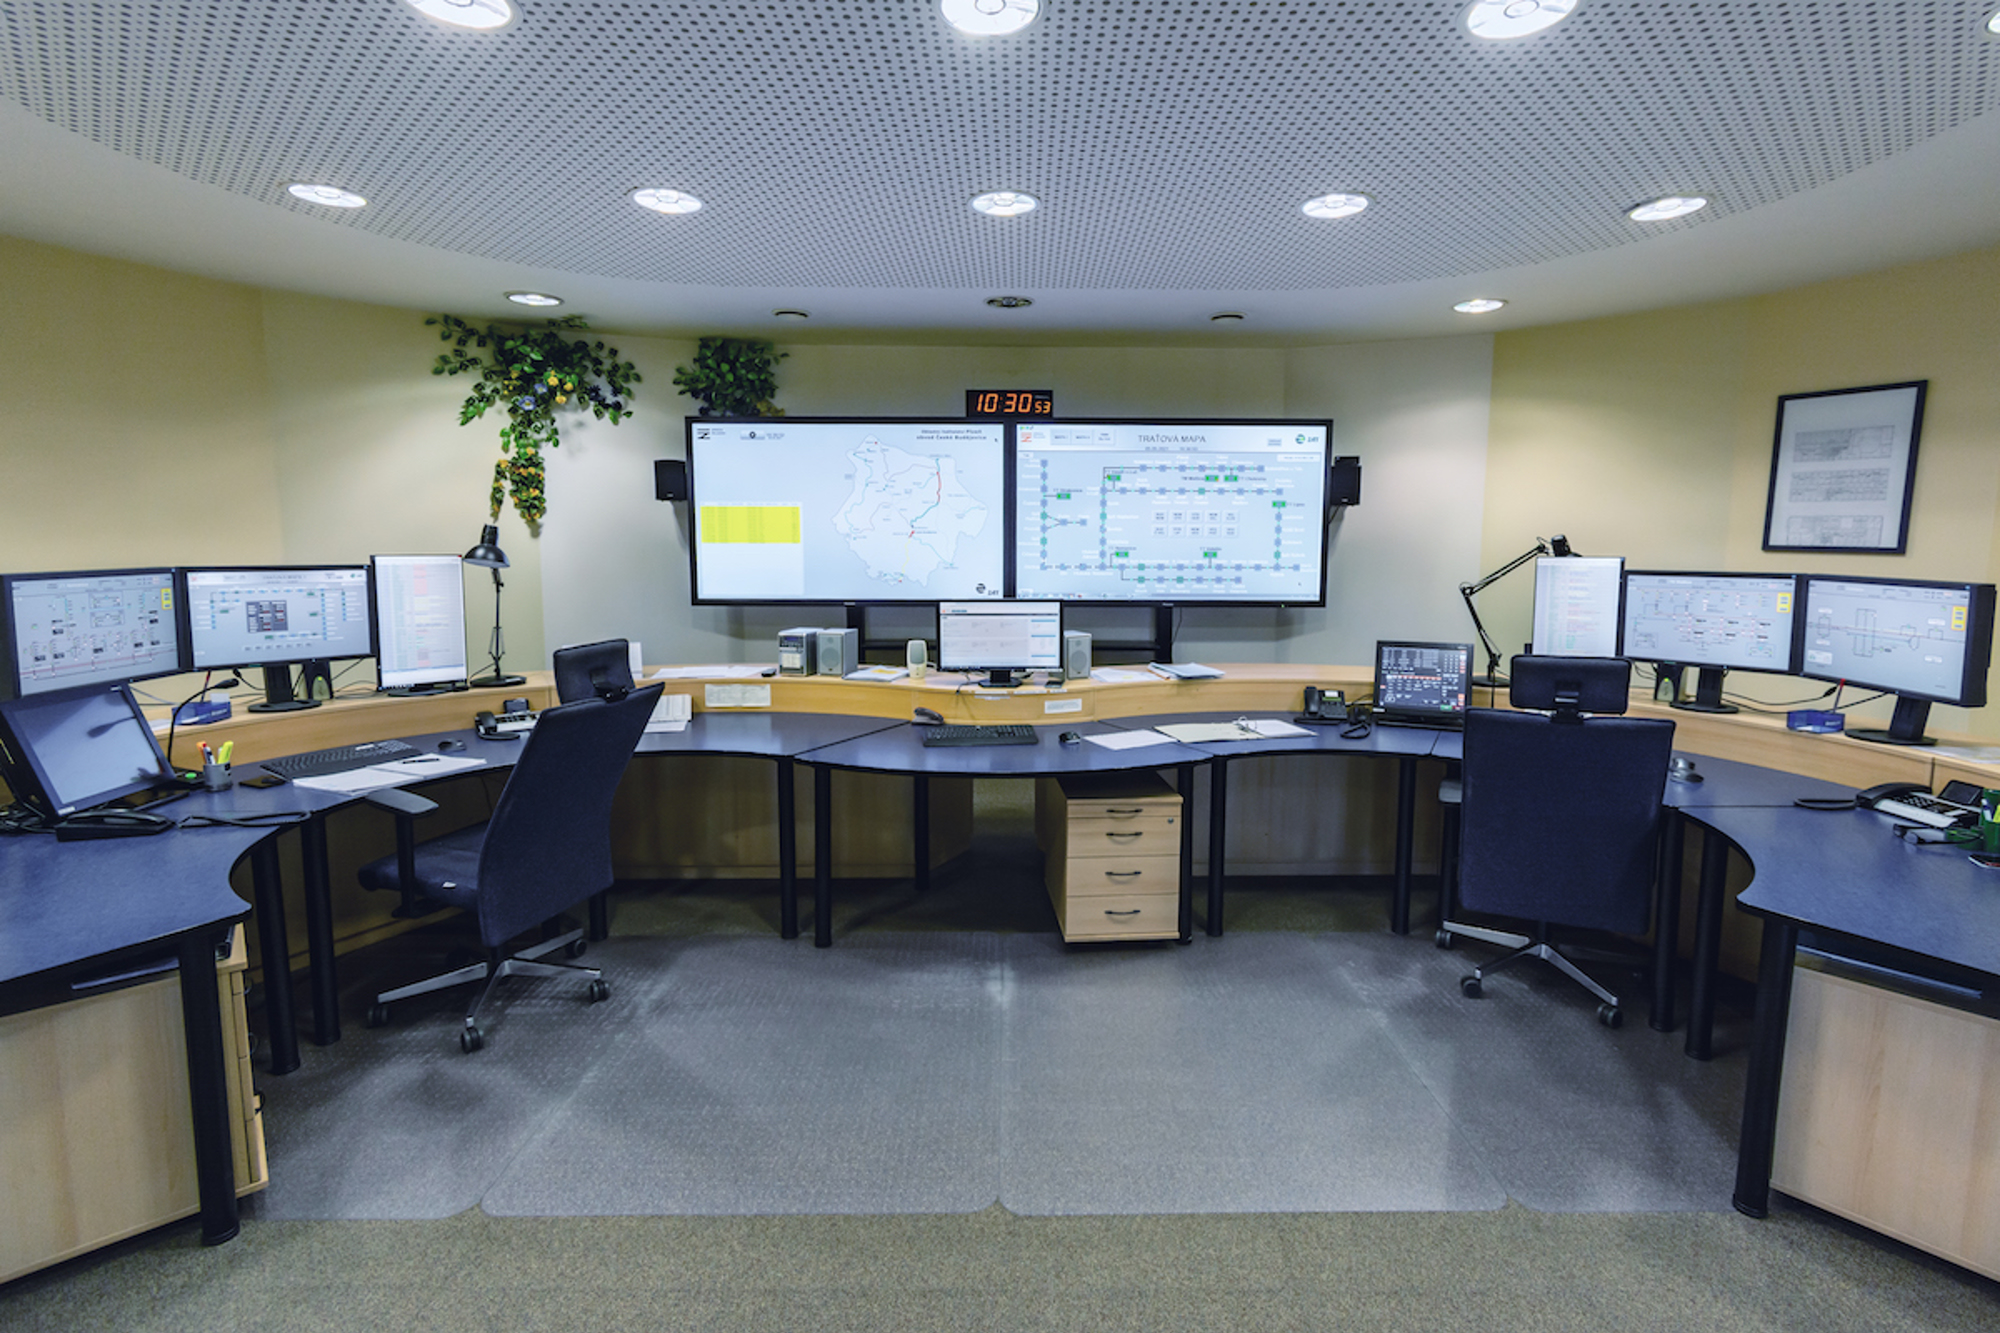 Visualization and control rooms